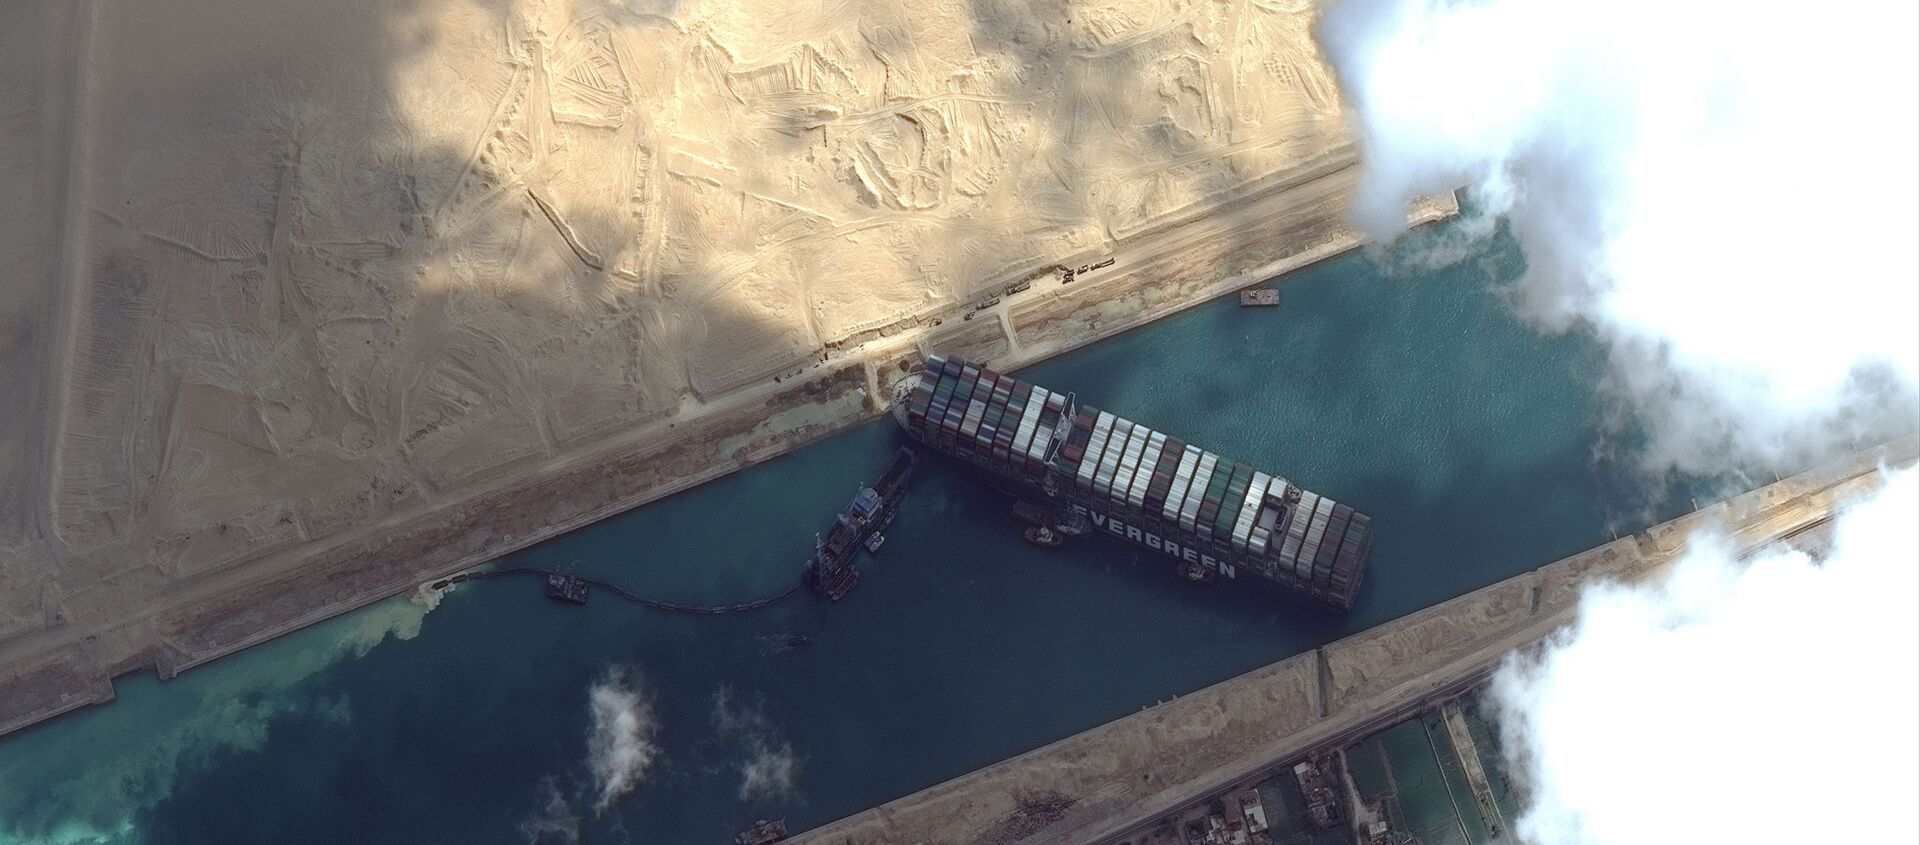 The Ever Given container ship is pictured in the Suez Canal in this Maxar Technologies satellite image, taken on 26 March 2021 - Sputnik International, 1920, 29.03.2021